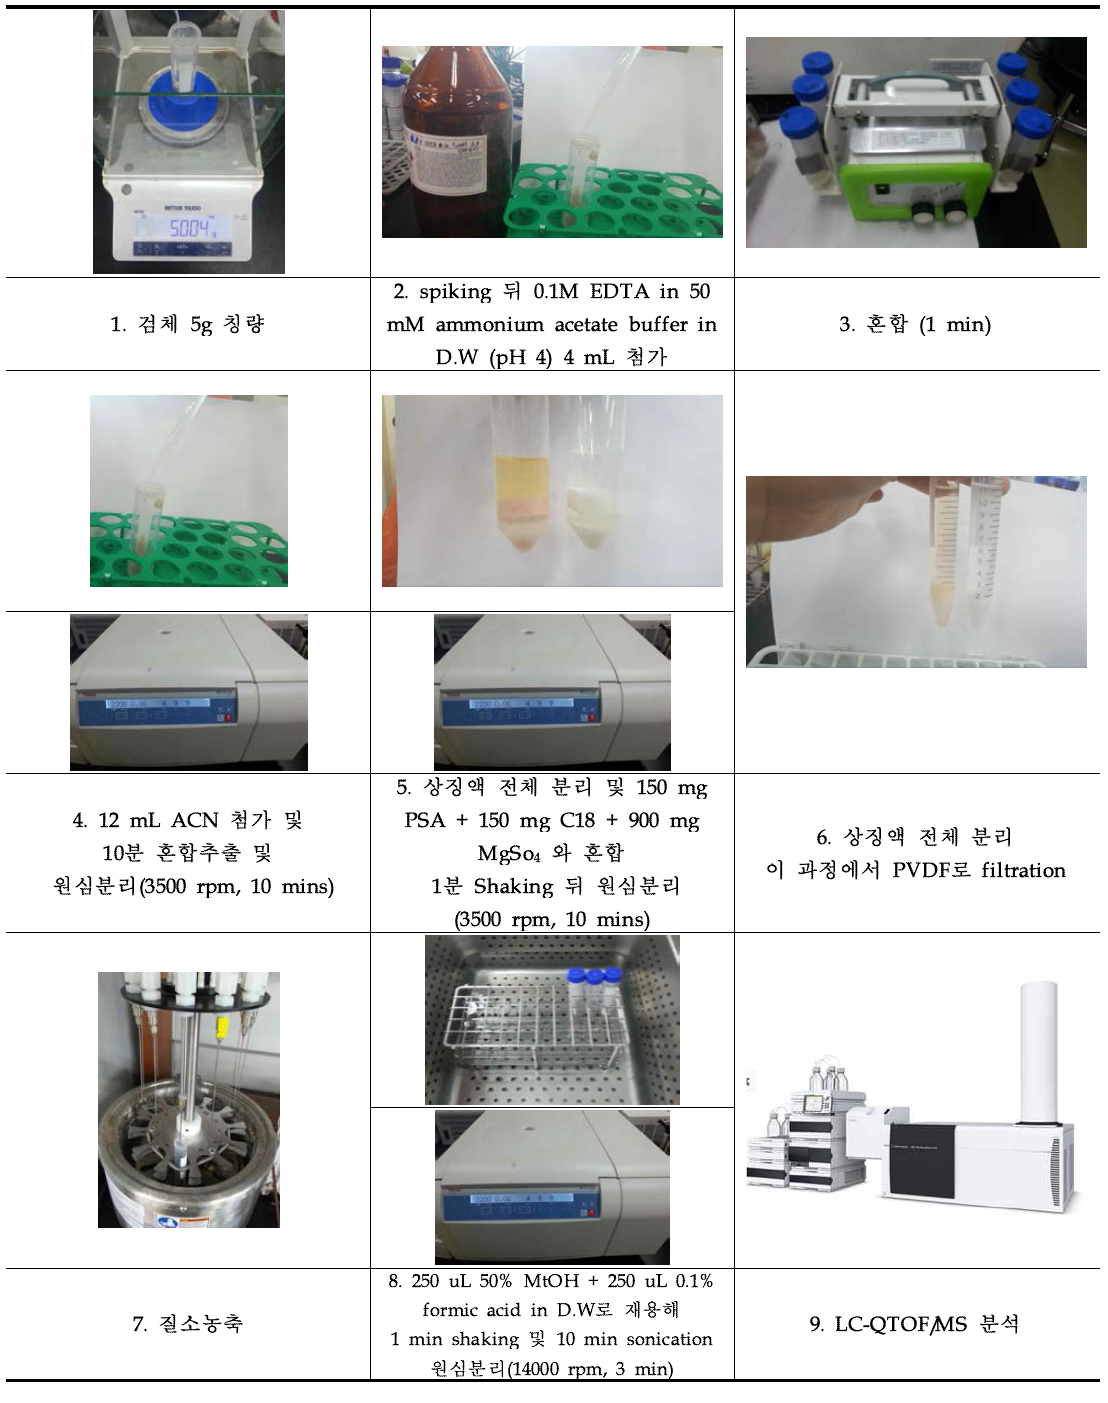 Analytical procedure for 41 pesticide residue in fishery products by LC-QTOF/MS